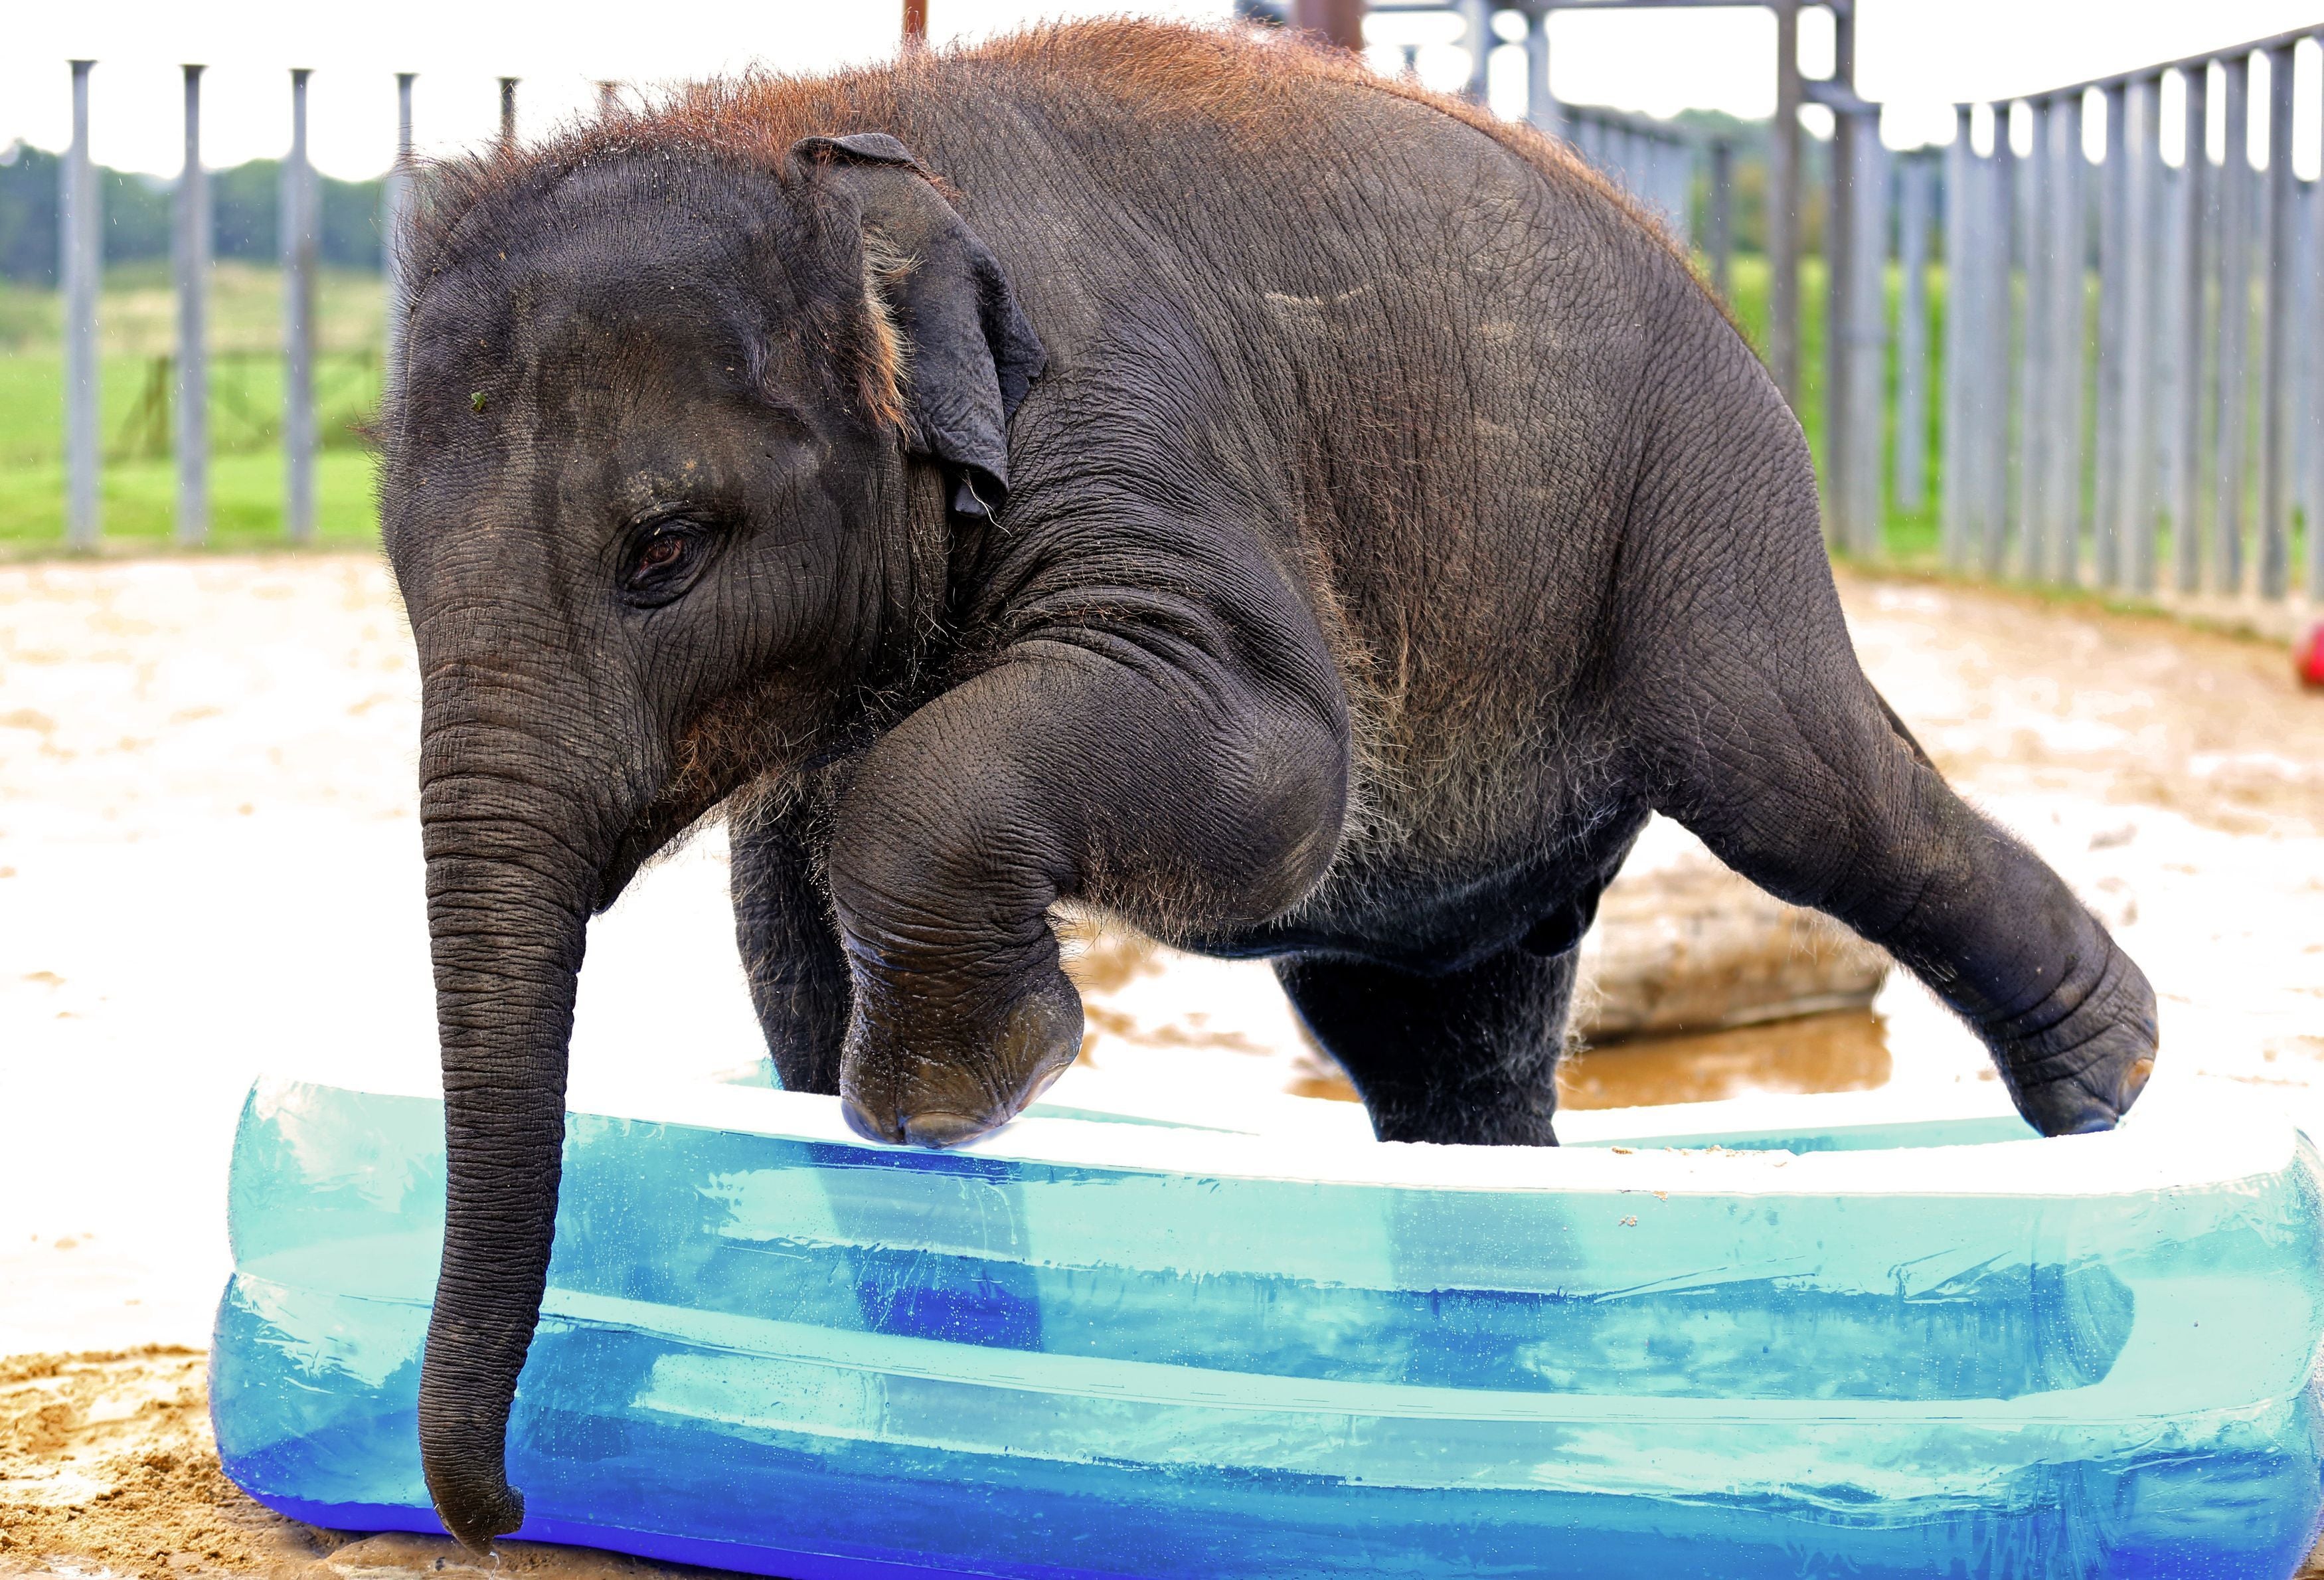 Domestic paddling pools cannot be filled under hosepipe ban rules, although zoos are exempt (Chris Radburn/PA)